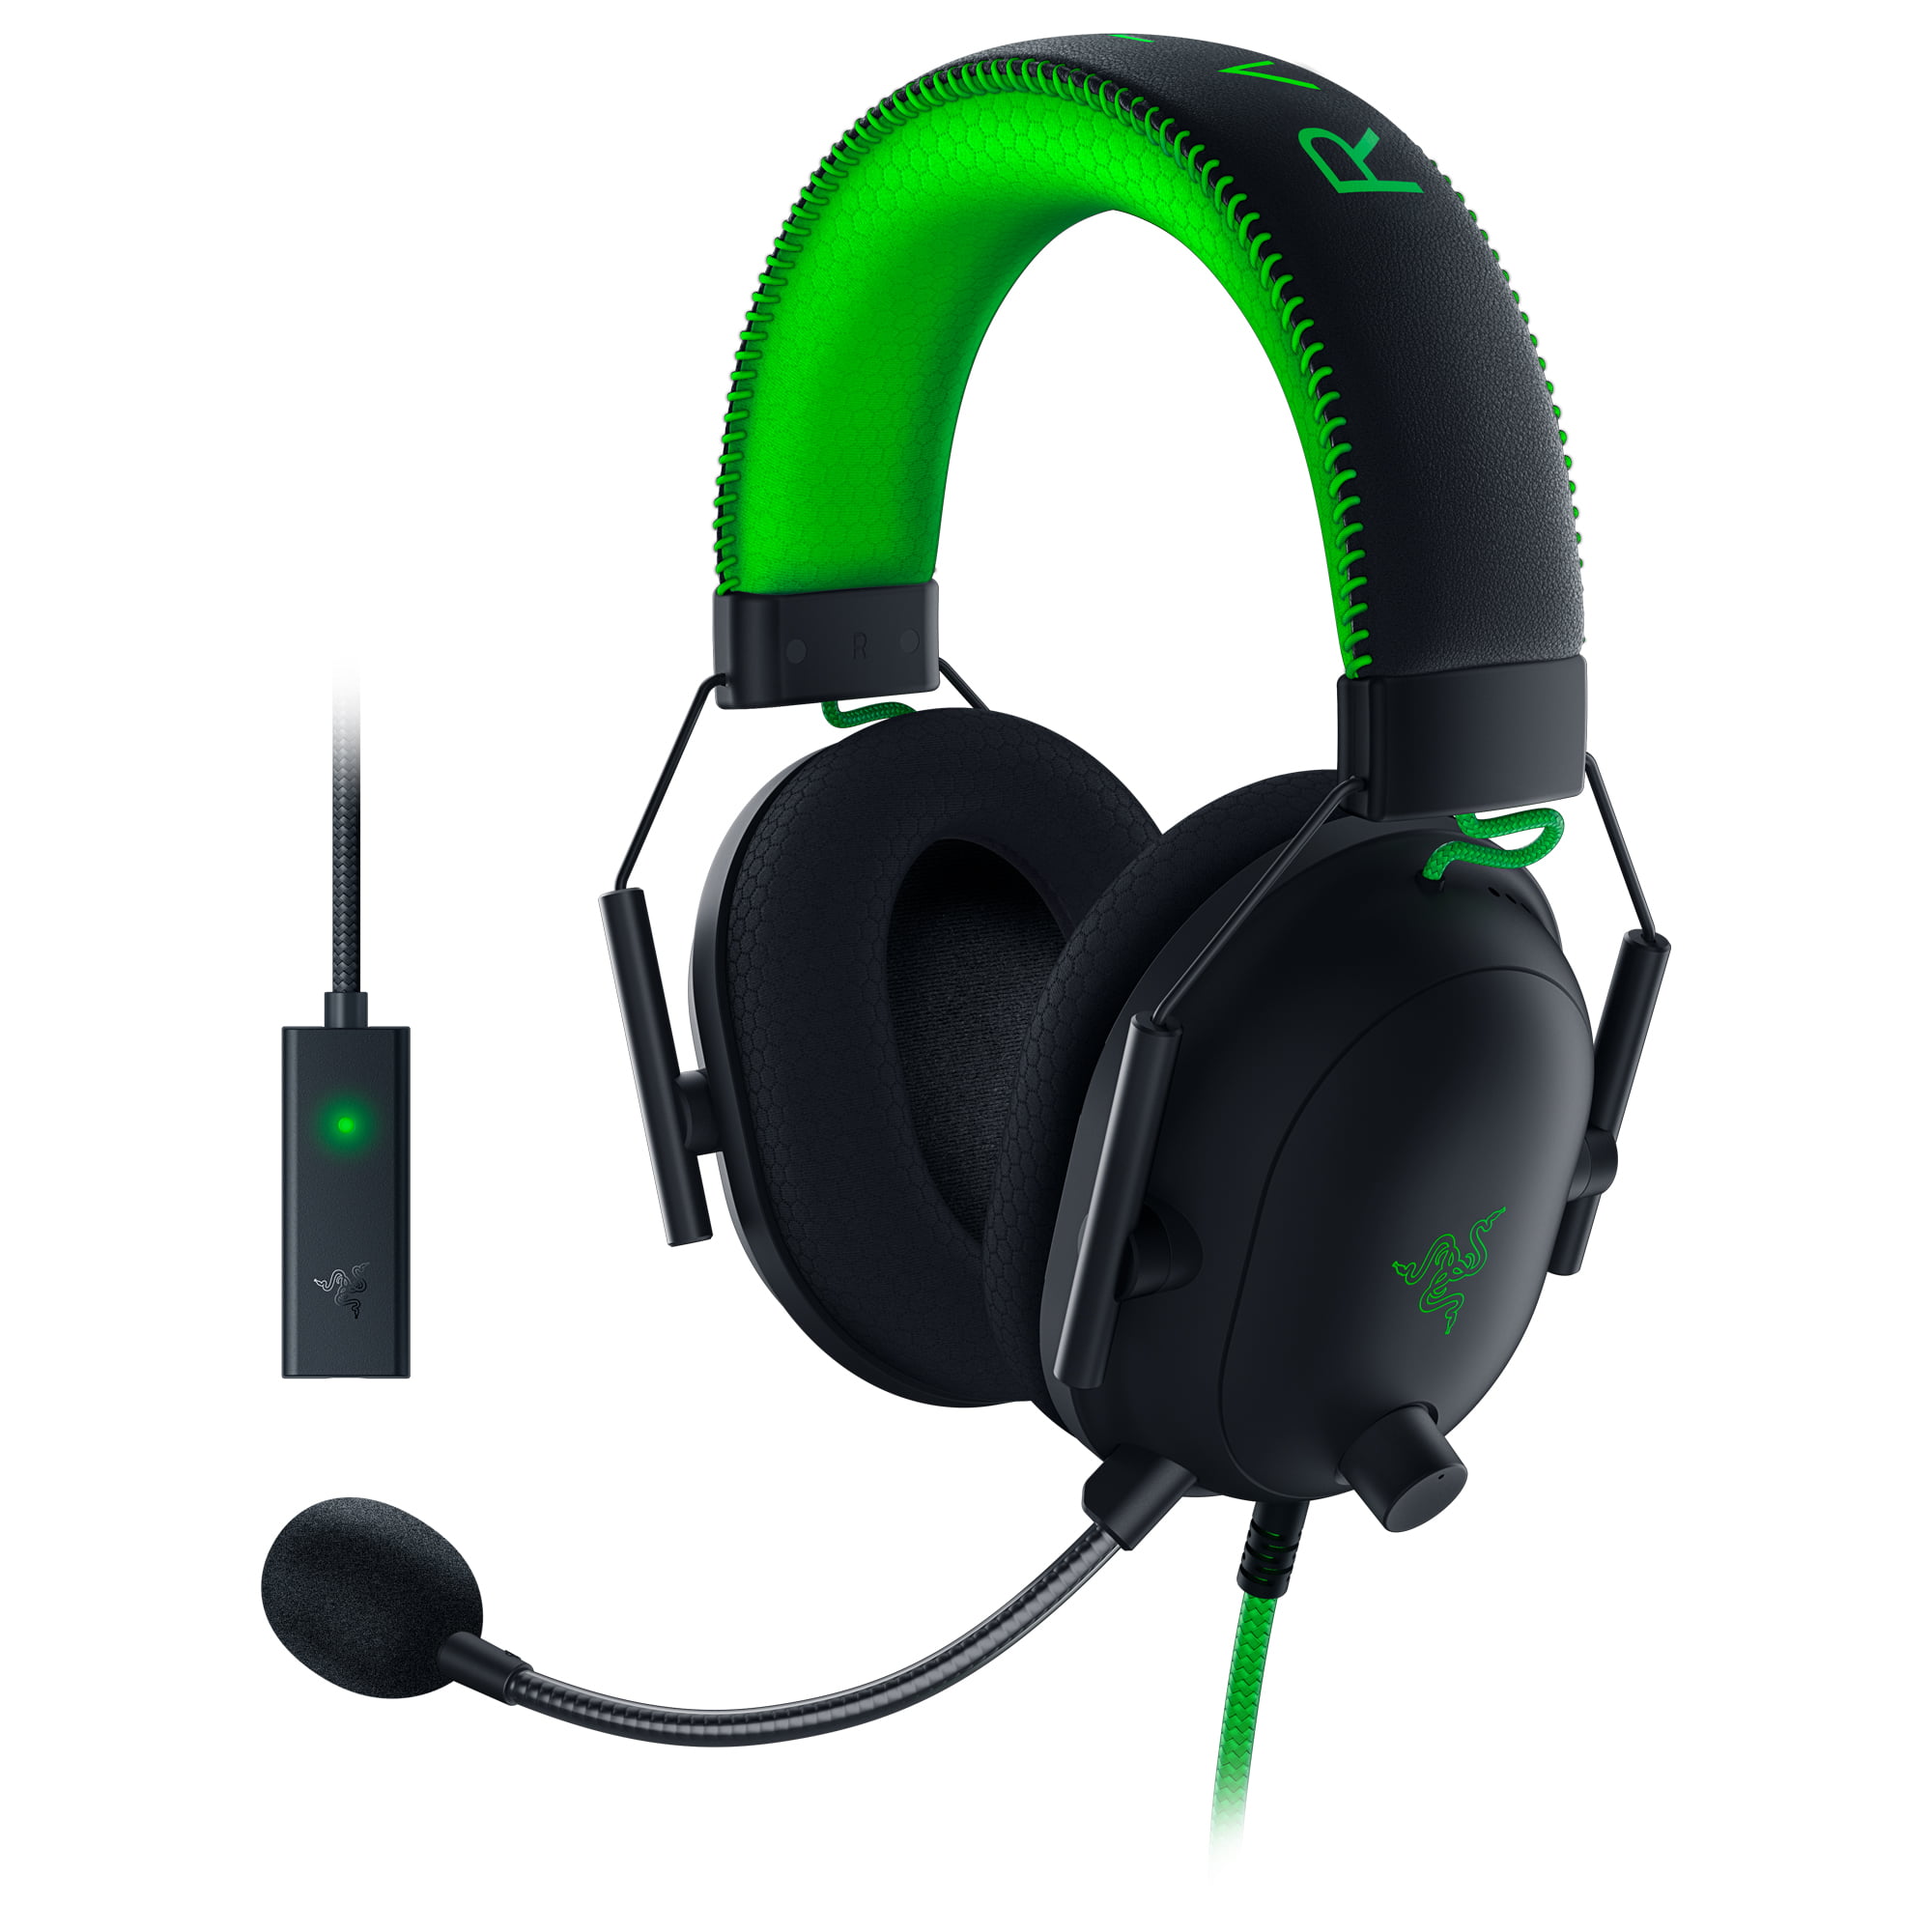 Razer BlackShark V2 Special Edition Wired Gaming Headset for PC, PS4, PS5, Xbox One, Xbox Series X|S, Nintendo Switch, Black/Green